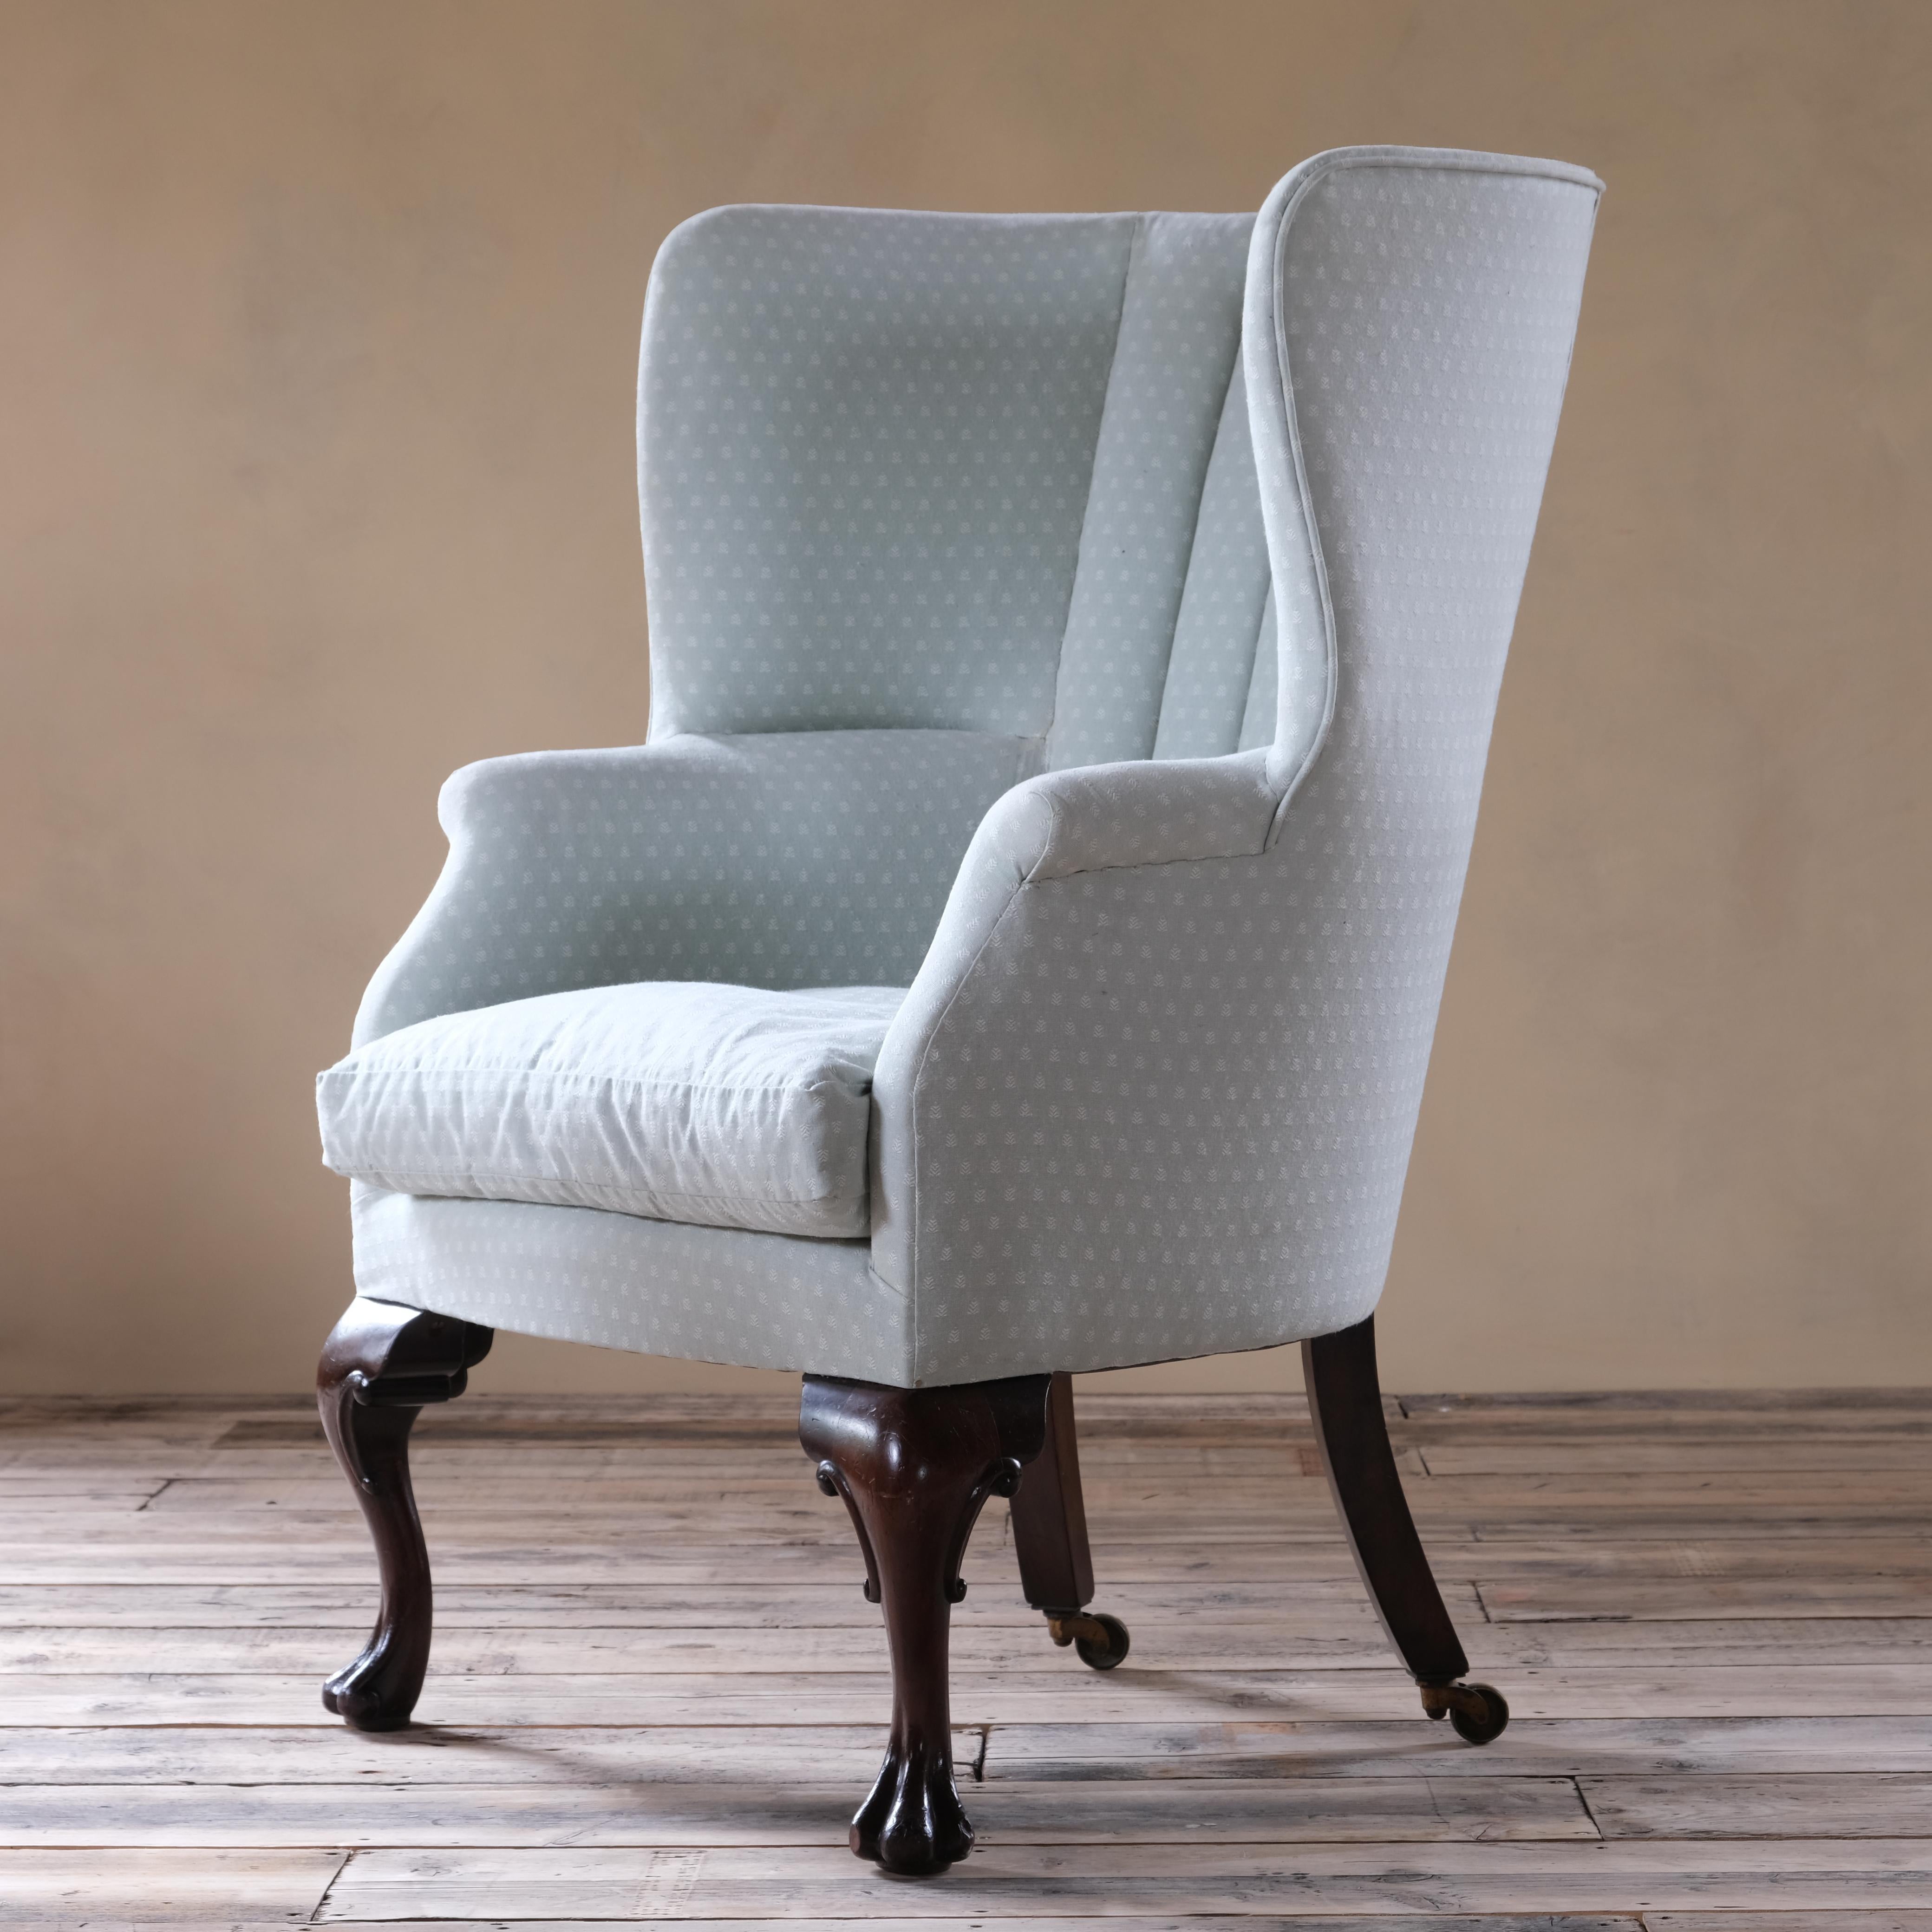 A large c1900 barrel backed armchair raised on large good quality carved cabriolet front legs and out splayed rear legs with Cope and Collinson brass casters. 

The pale blue fabric is recently done (not by us) and in very good condition, ready